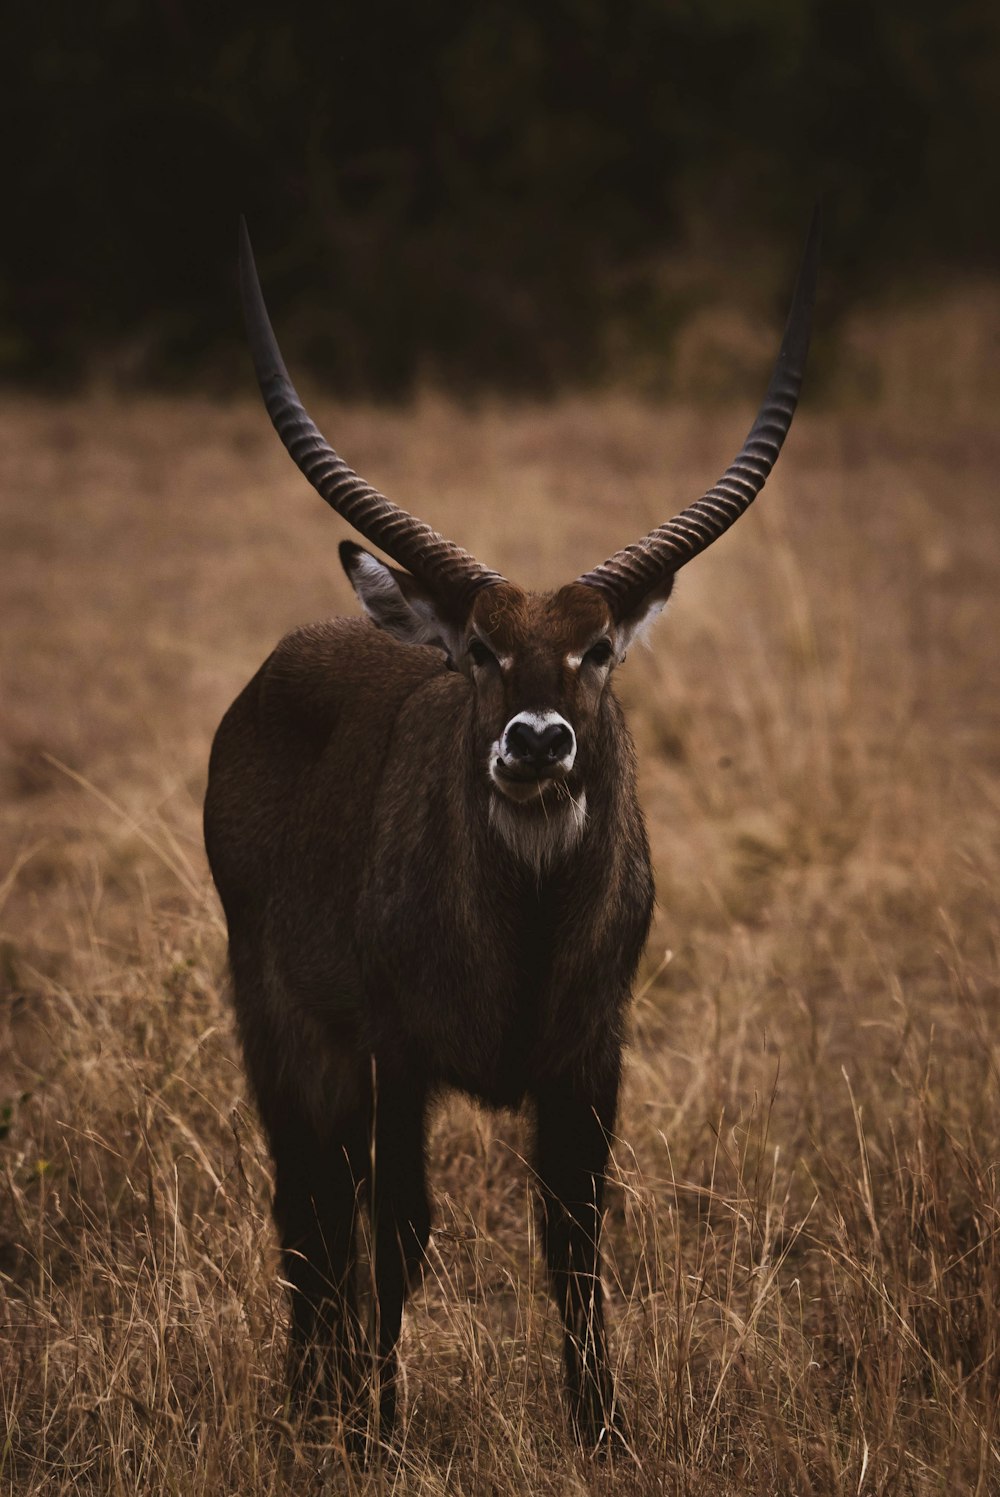 a horned animal standing in a field